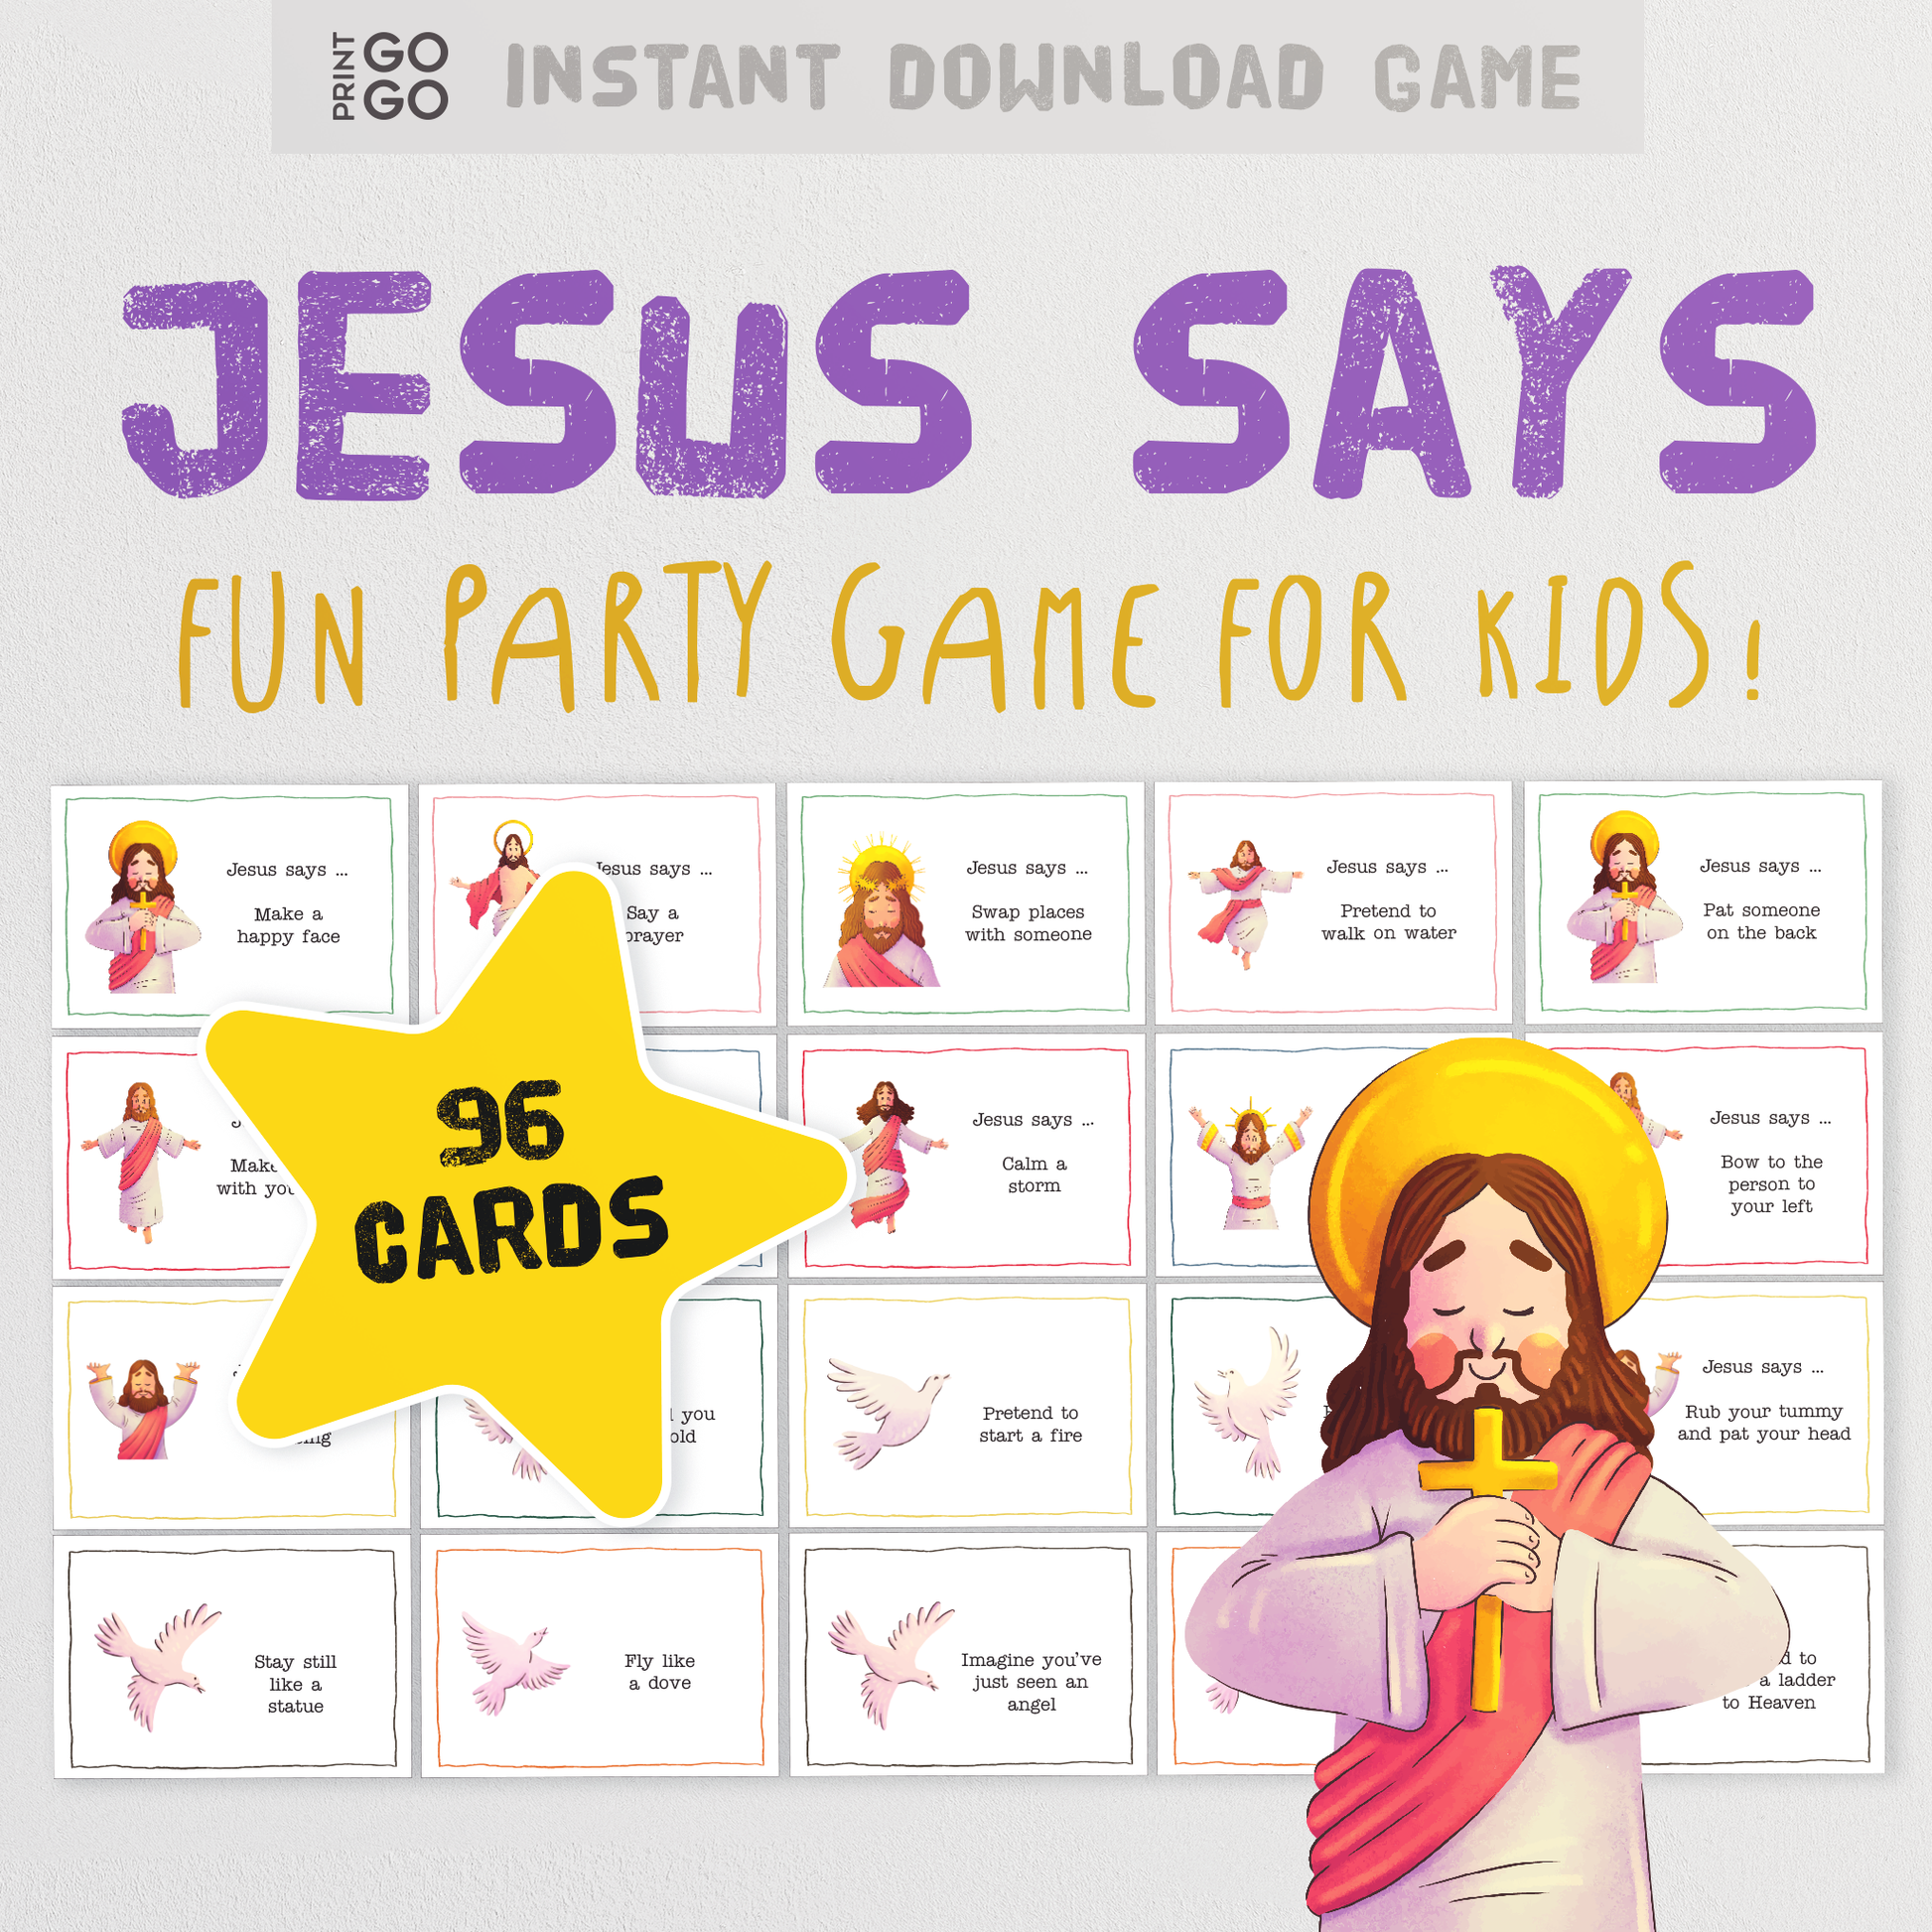 Jesus Says - The Fun Church Party Game for Kids!